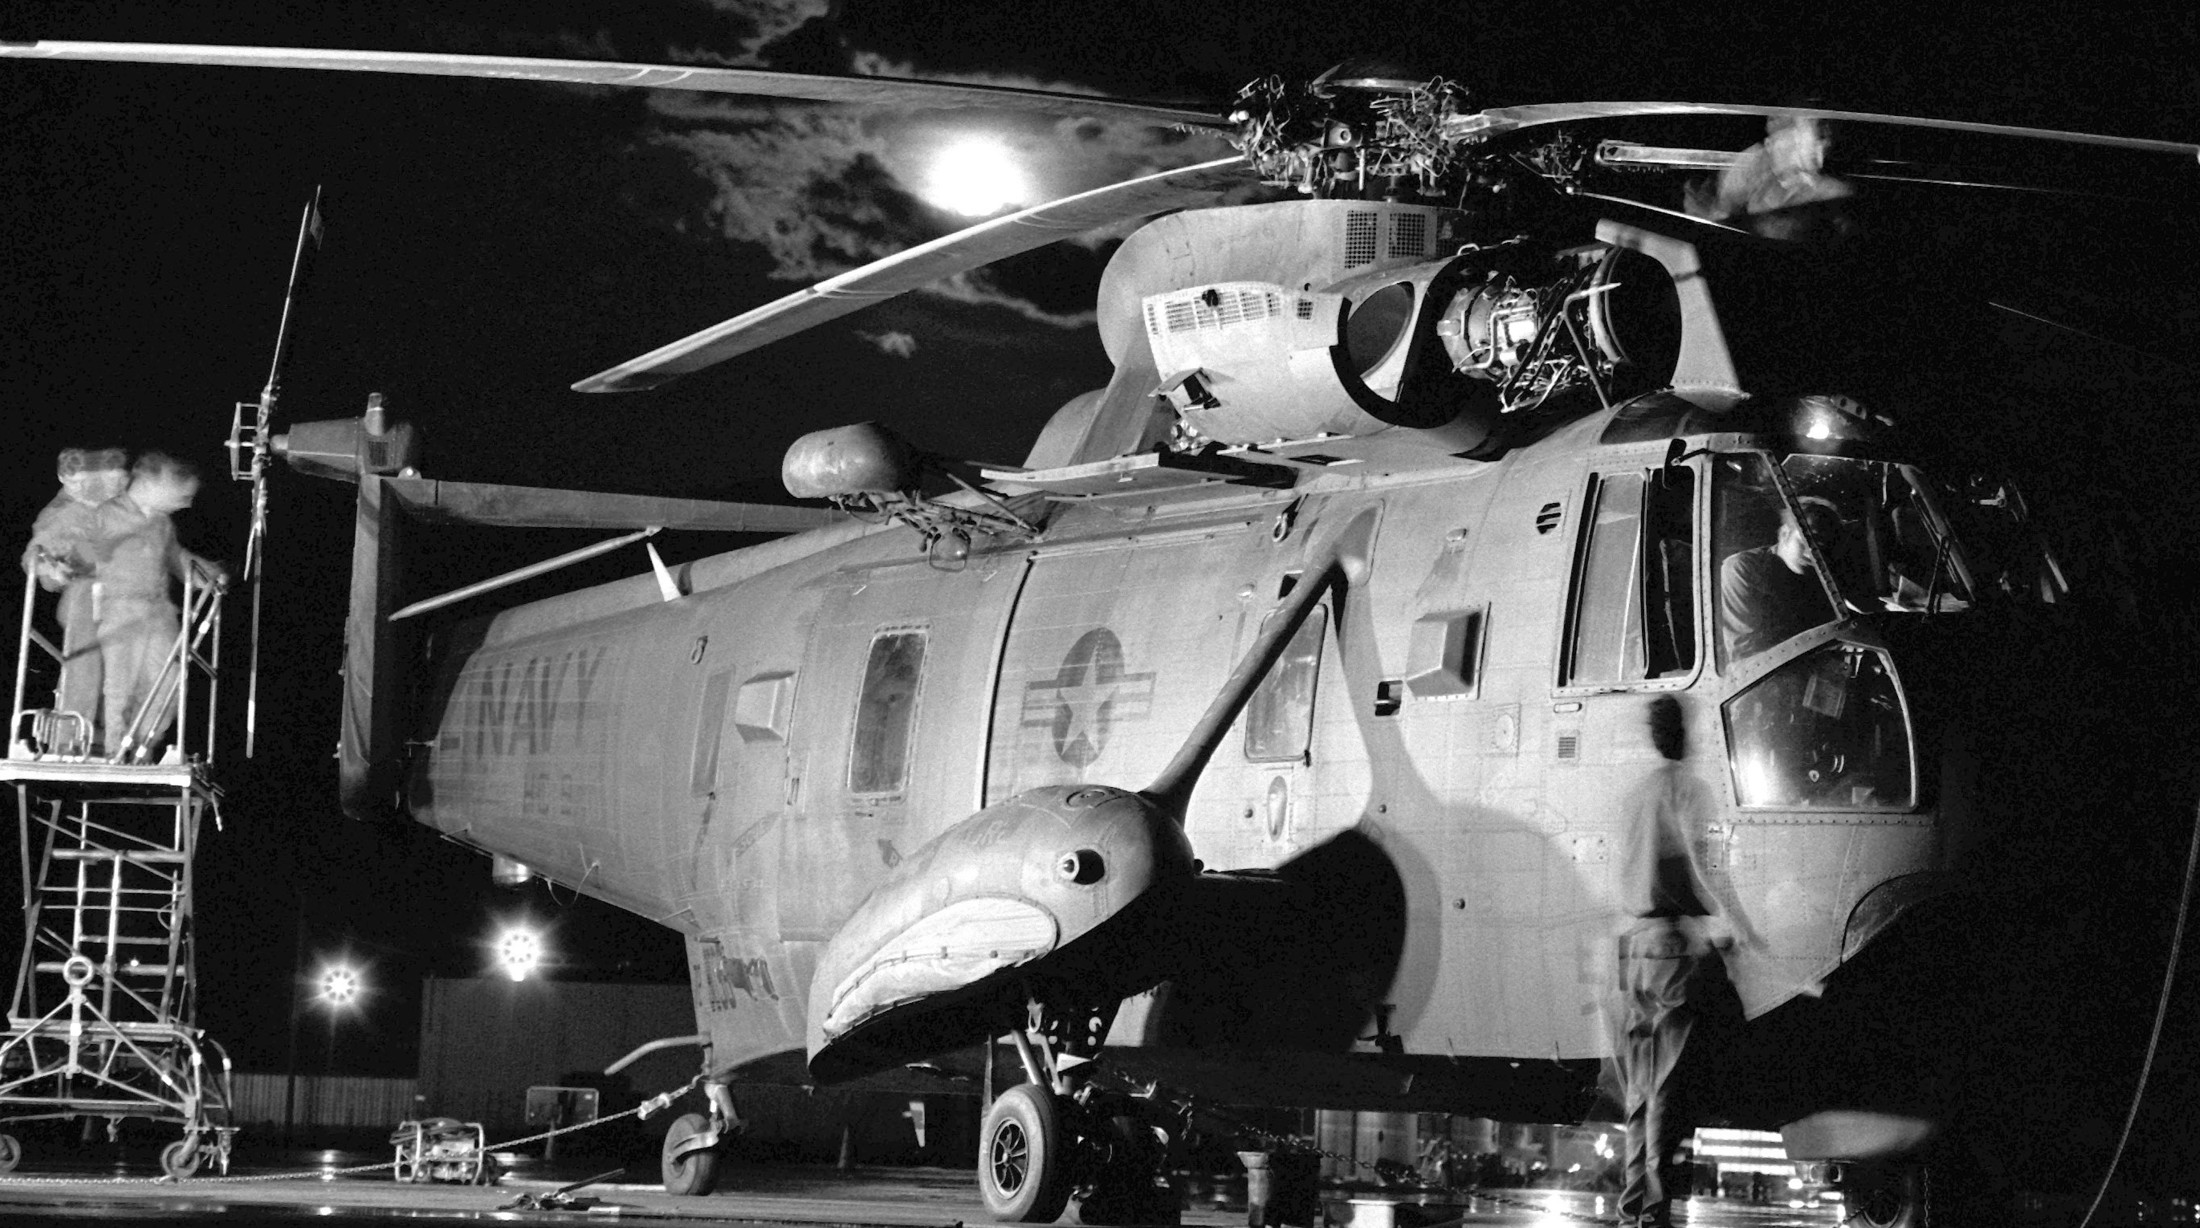 hc-9 protectors helicopter combat support squadron navy hh-3a sea king 04